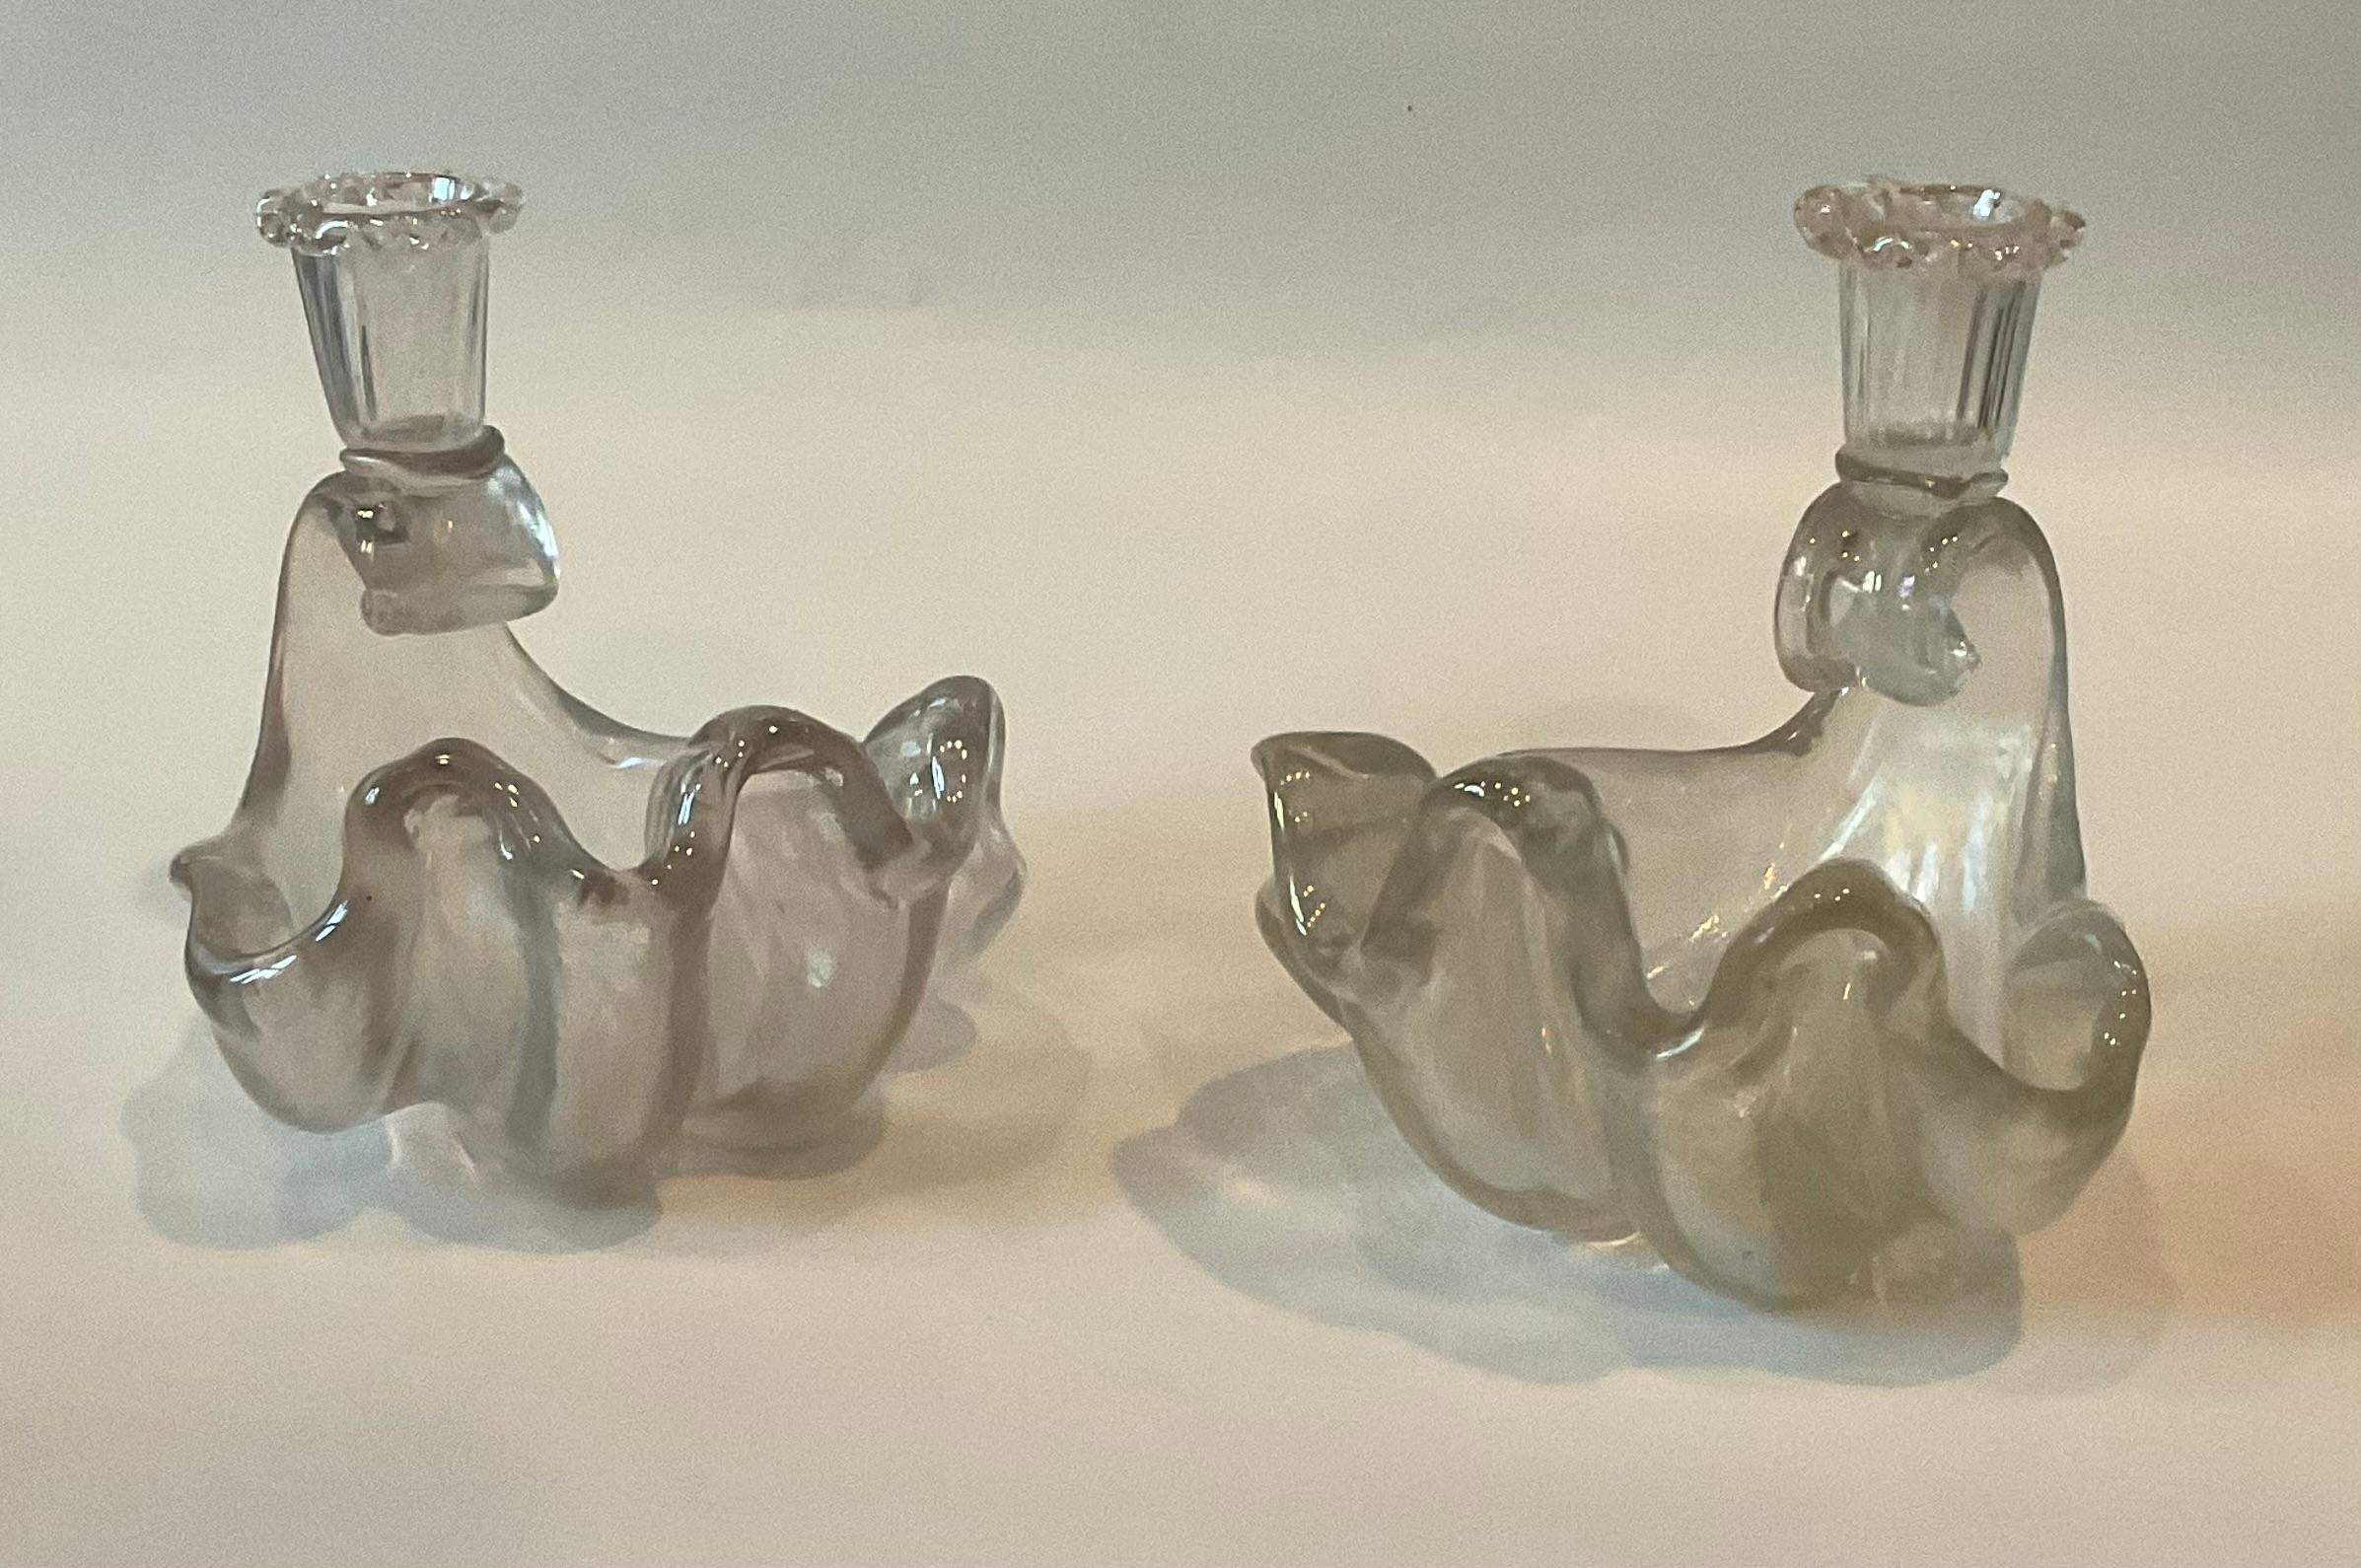 PAIR Ercole Barovier Murano Art Glass Shell Candle Holders in Opalescent glass. Both are hand blown and show slight difference due to being hand made. Rare to find a pair. 